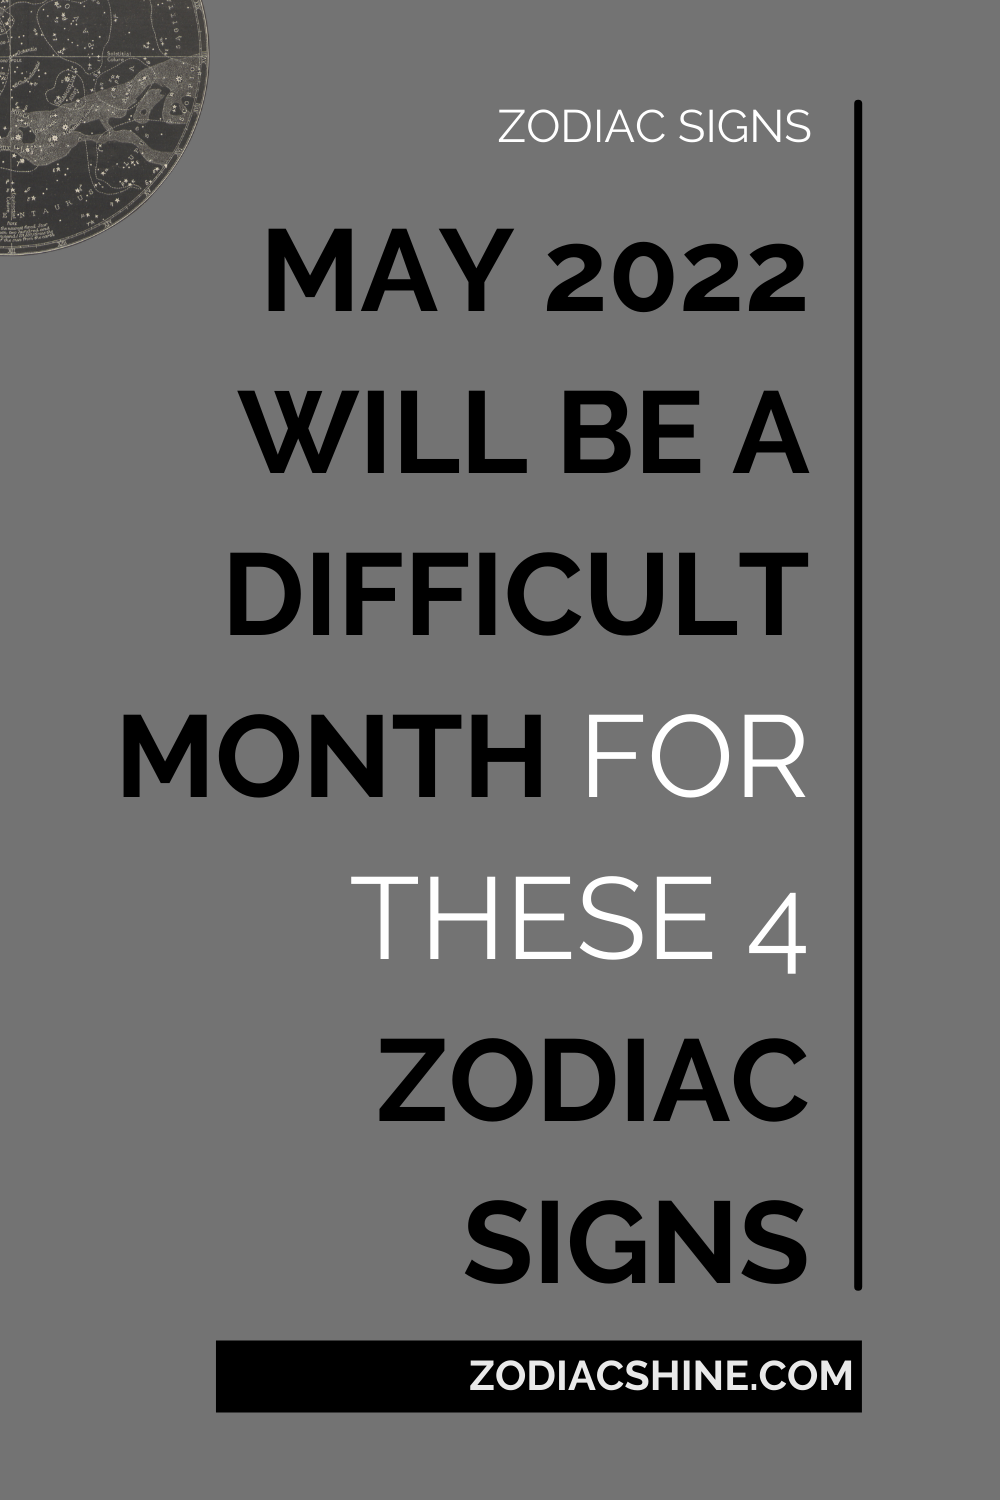 May 2022 Will Be A Difficult Month For These 4 Zodiac Signs